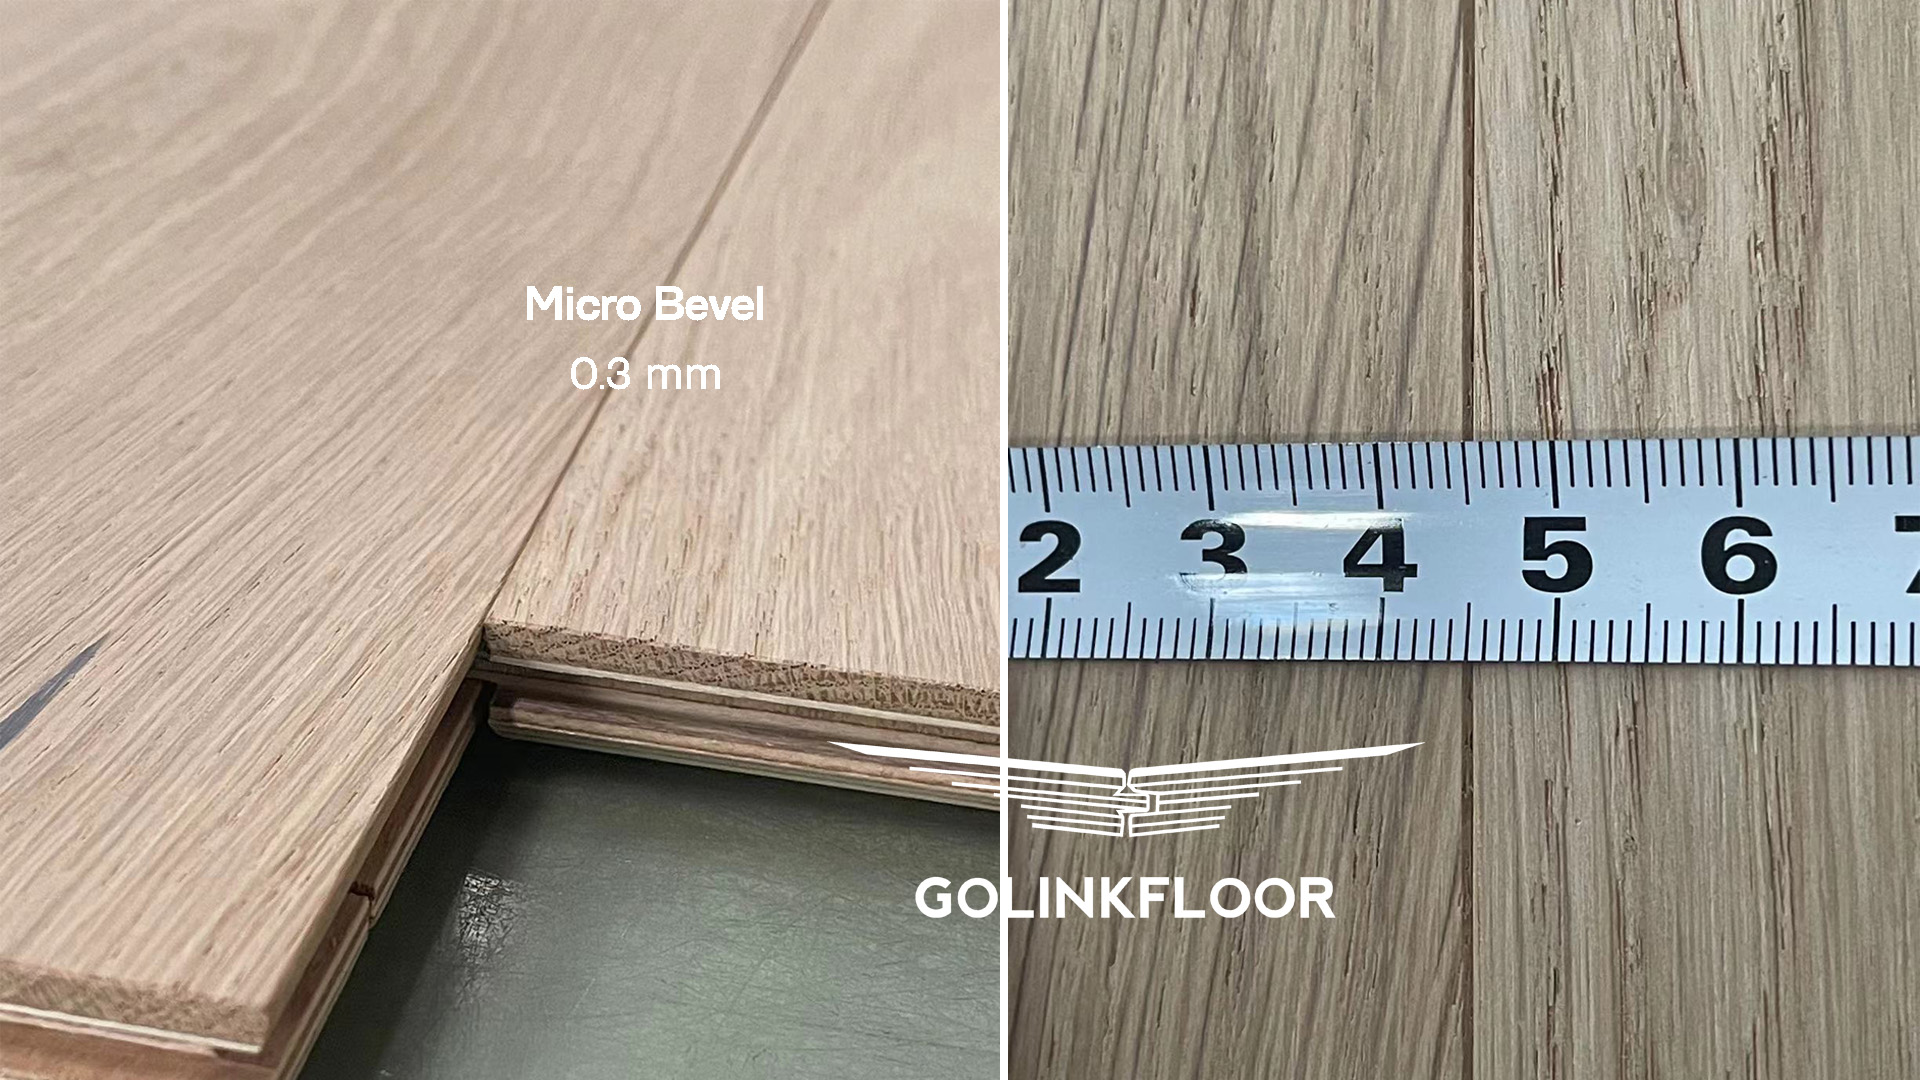 5 Bevel Styles Of Engineered Wood Flooring in Our Factory - GOLINK